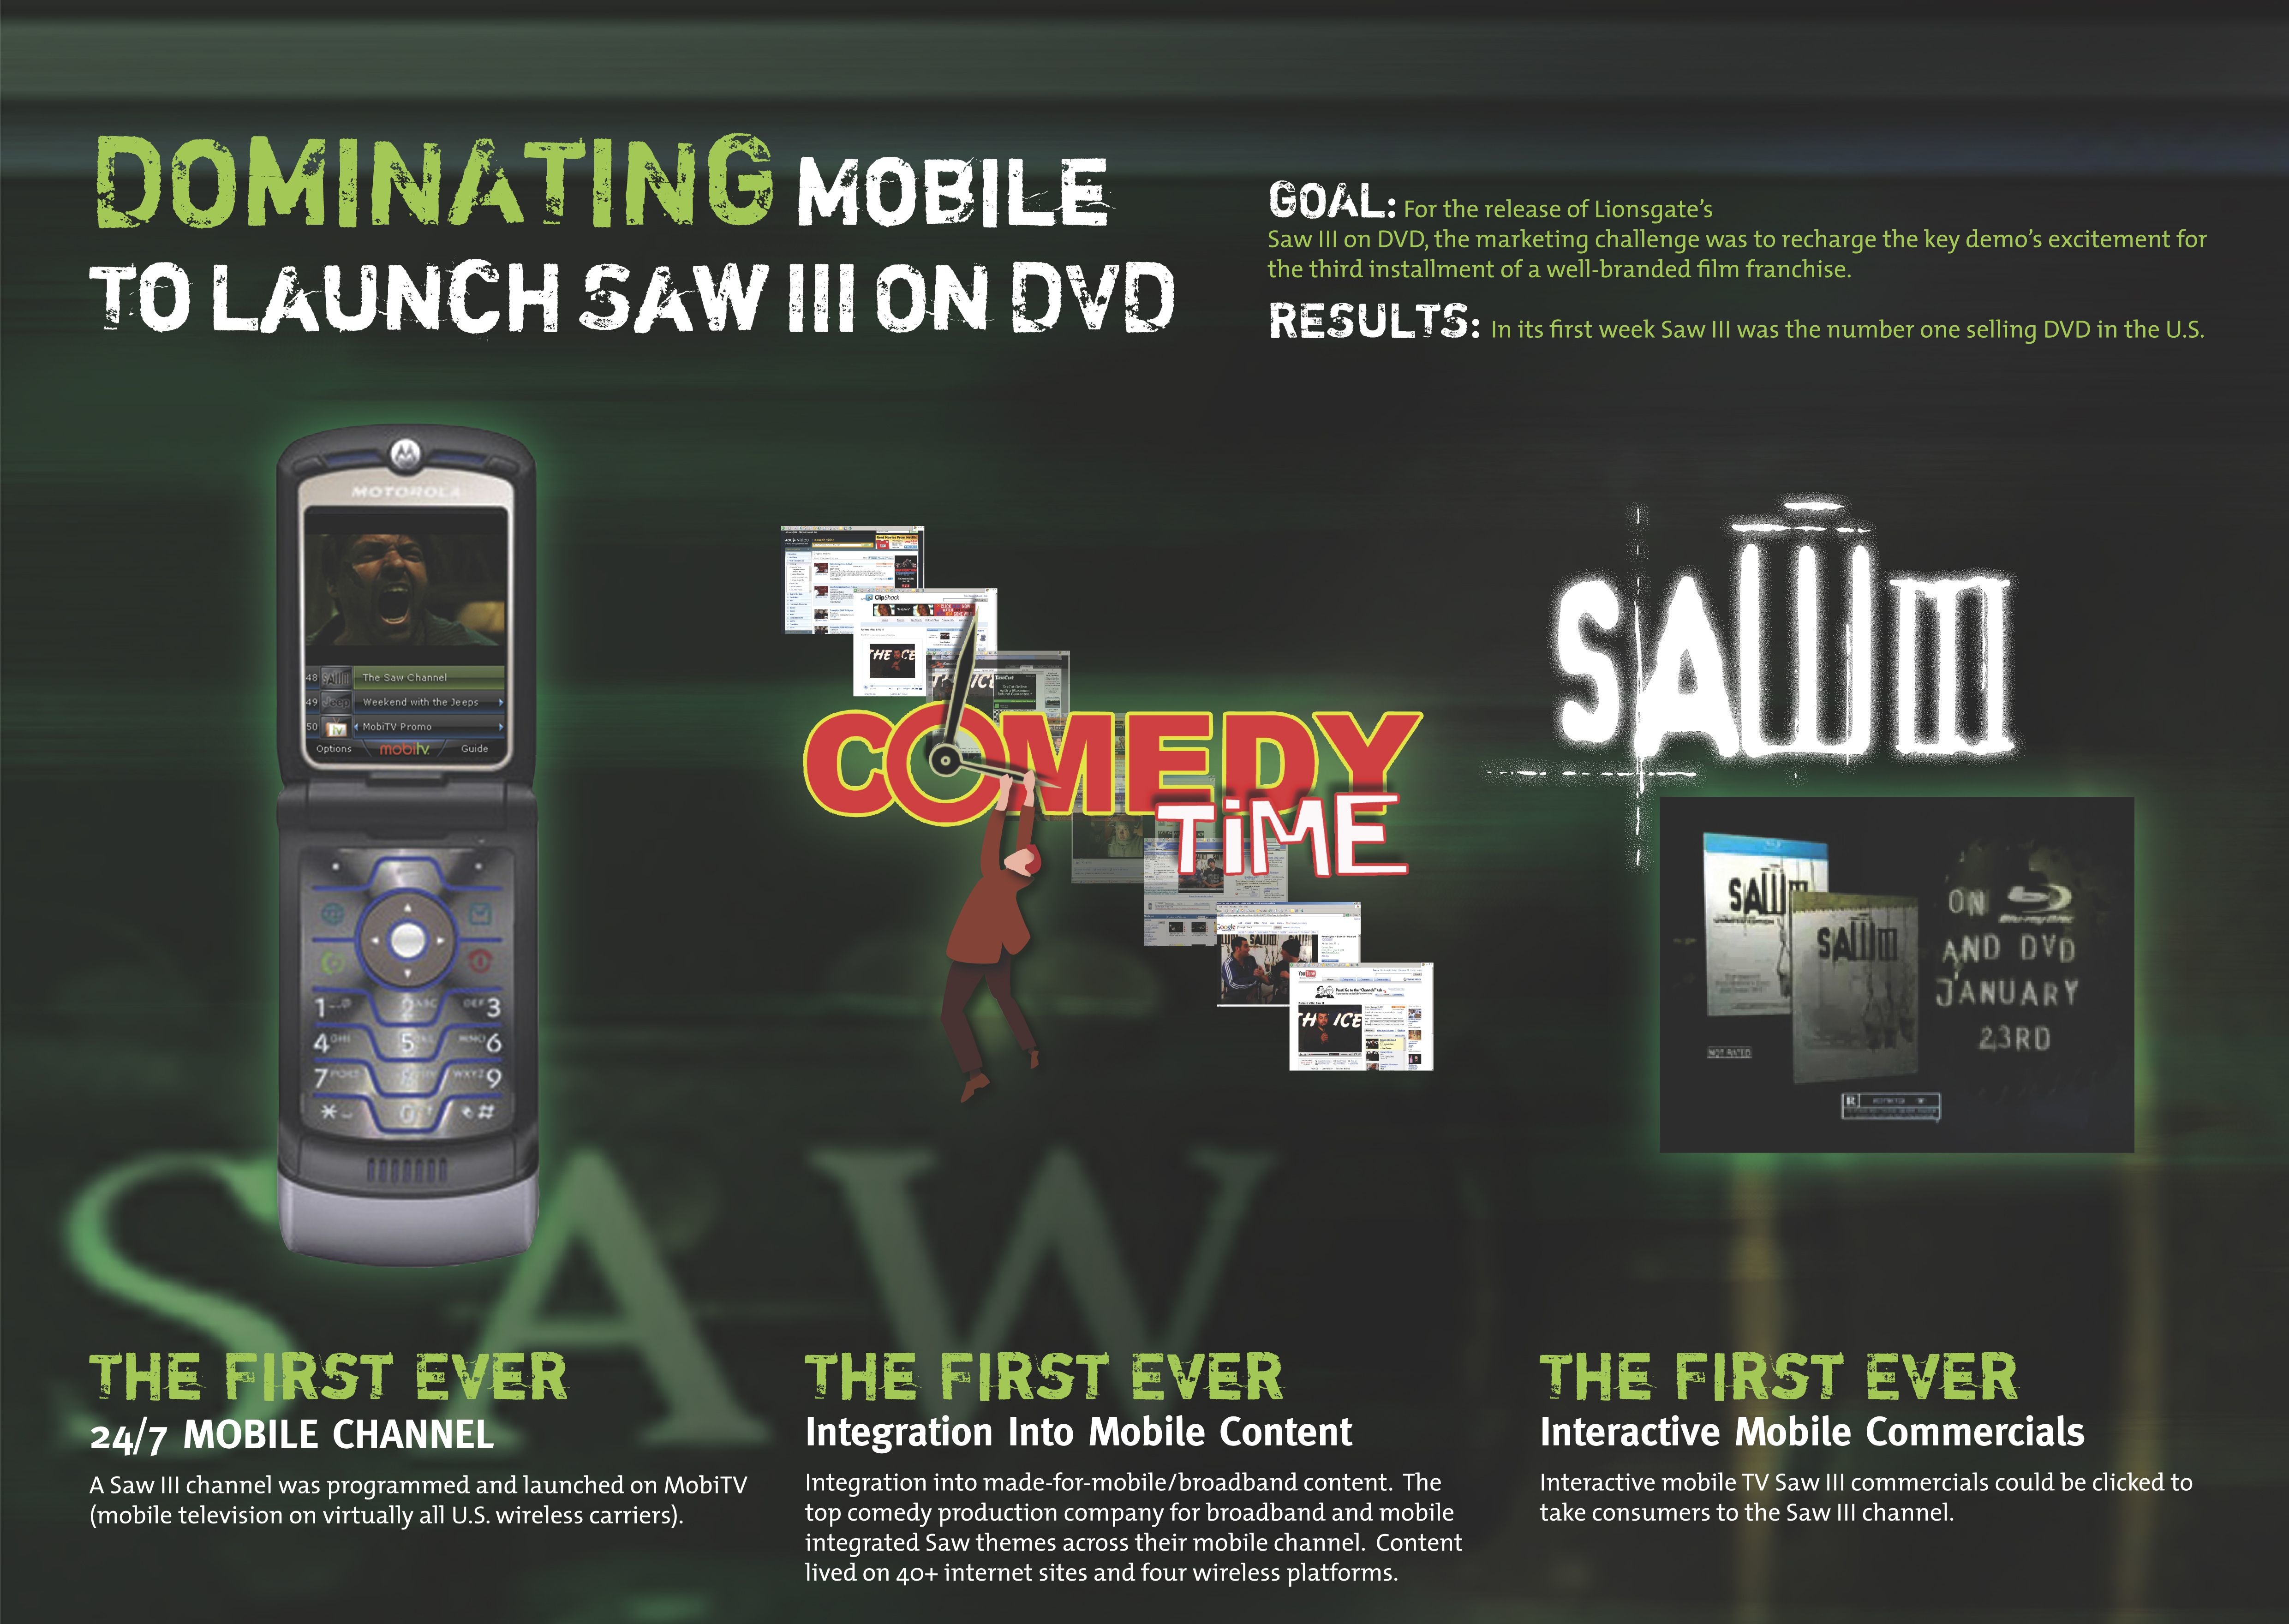 SAW III MOTION PICTURE